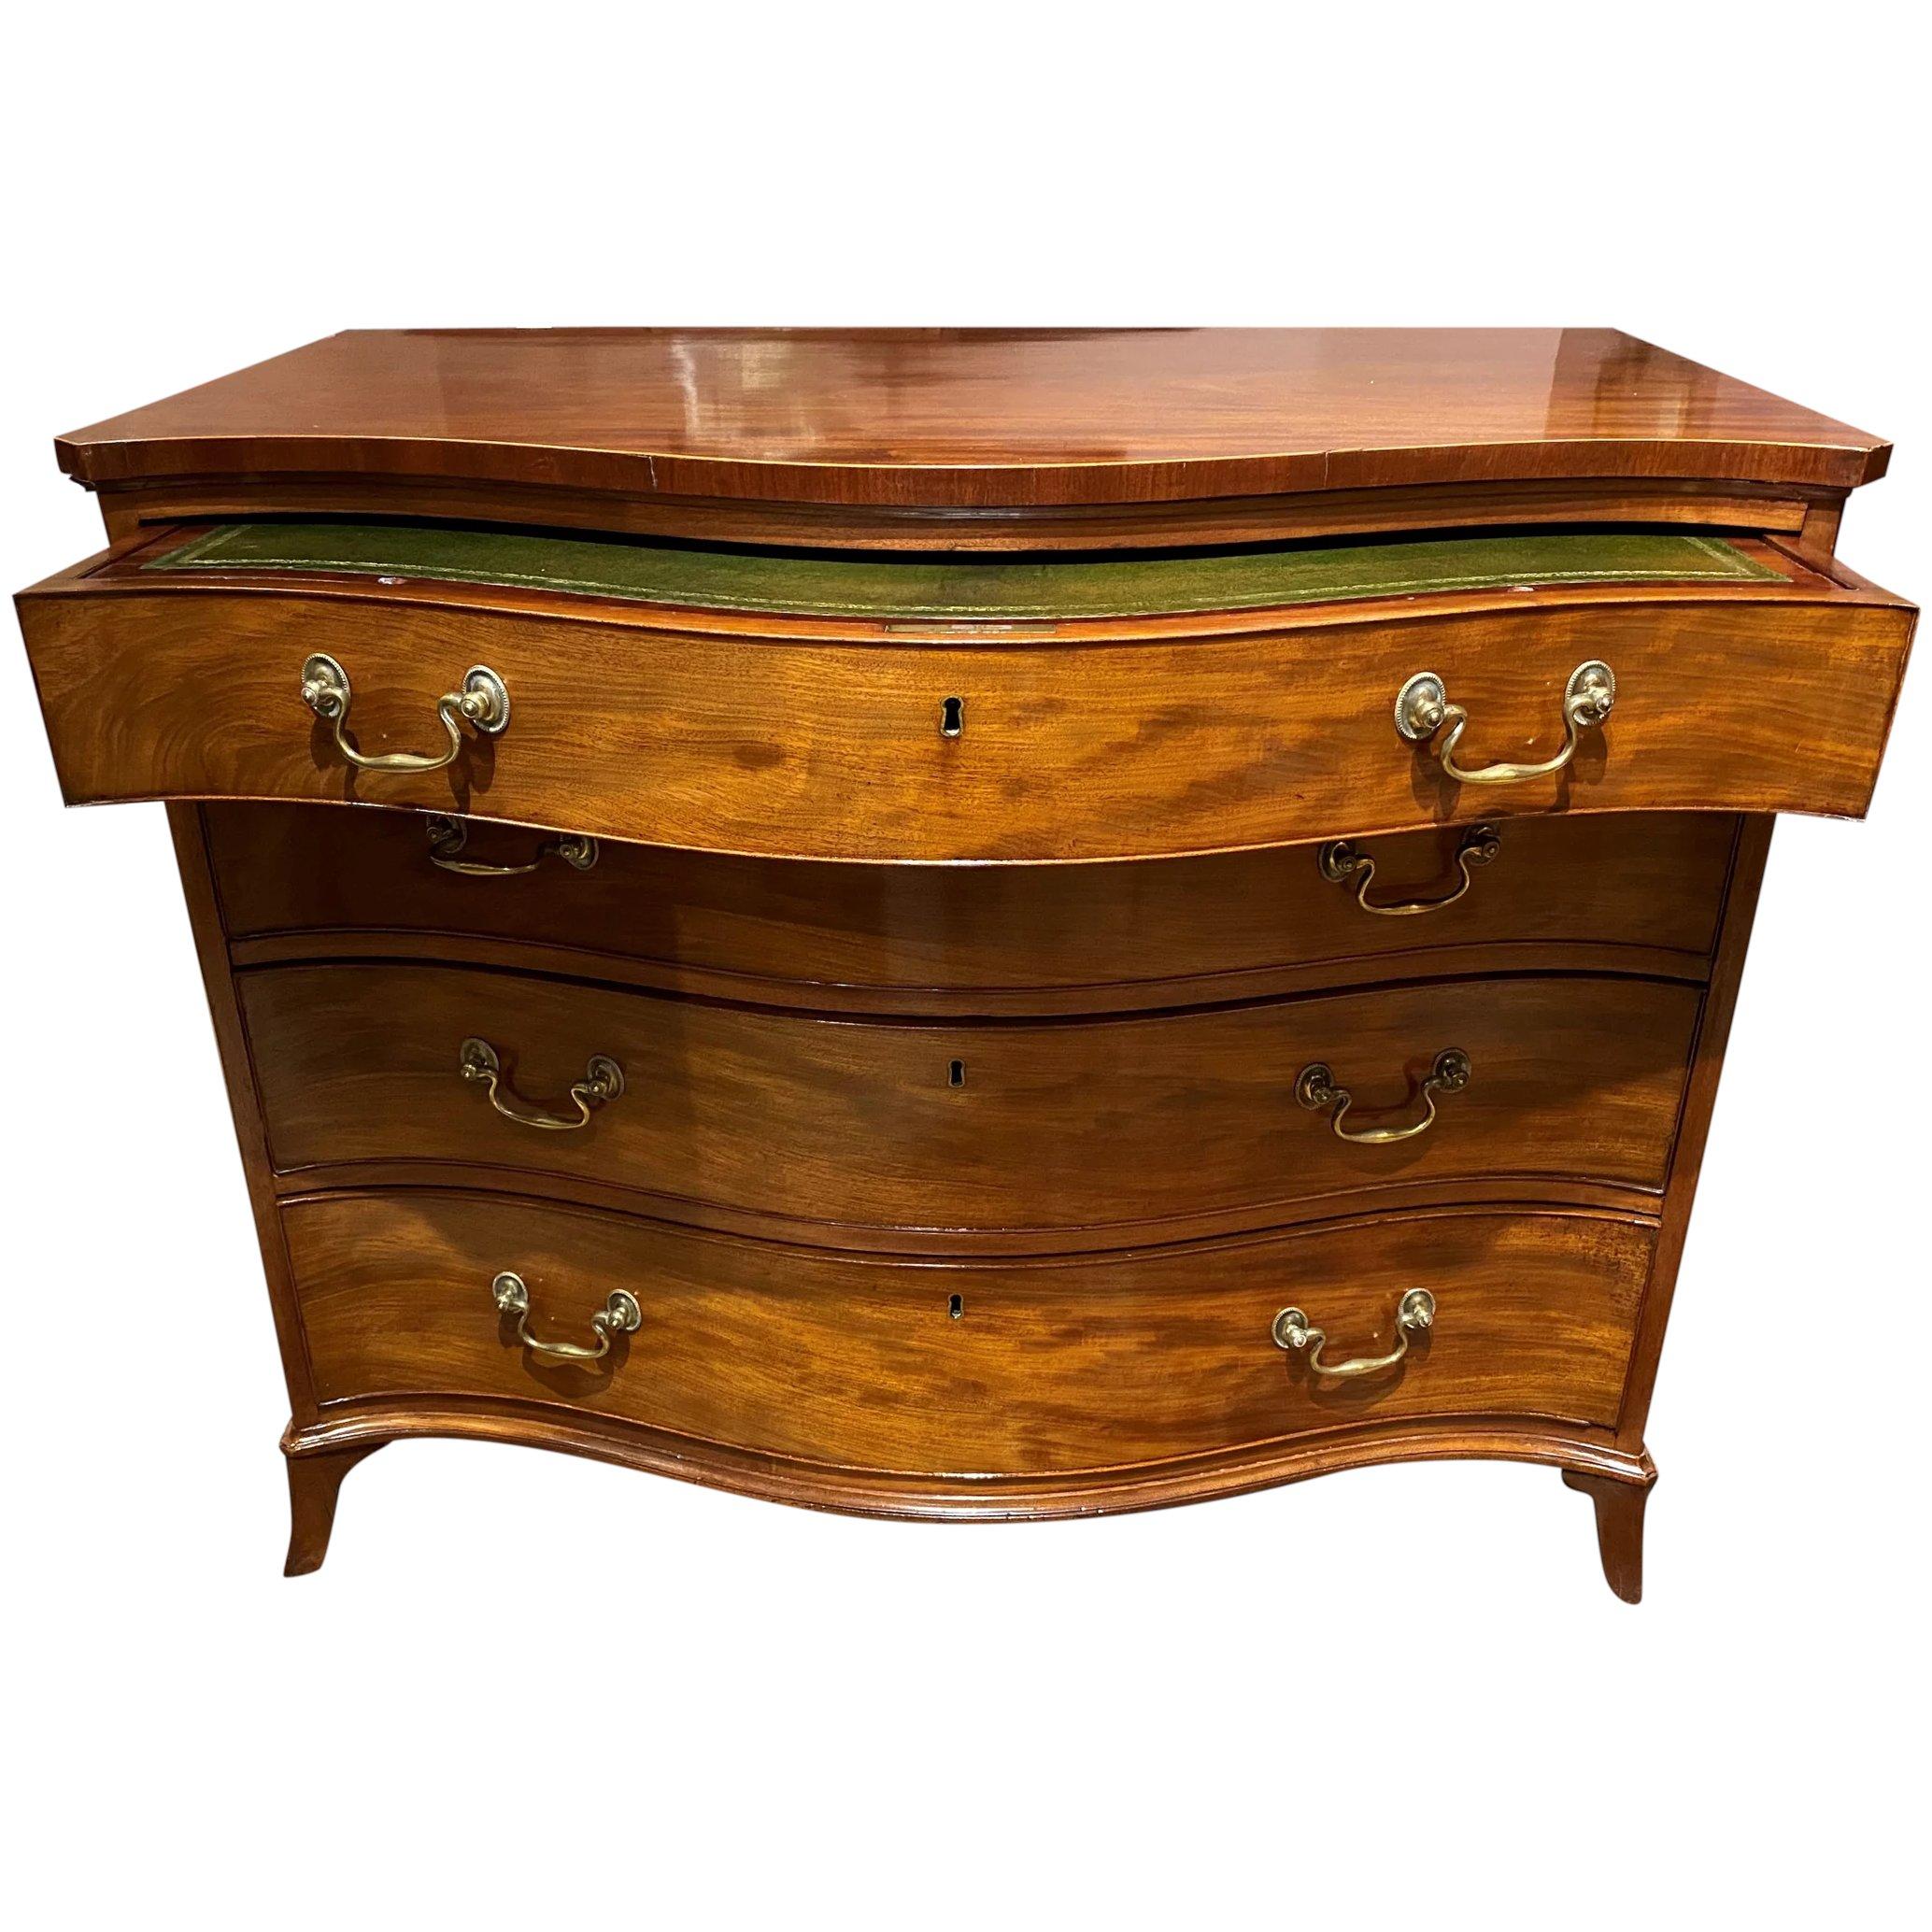 A fine Gillows, George III English mahogany serpentine dressing commode with shaped top surmounting a top drawer with green leather and gold leaf top drawer that pulls out to convert to a desk, enclosing a divided interior with four lidded